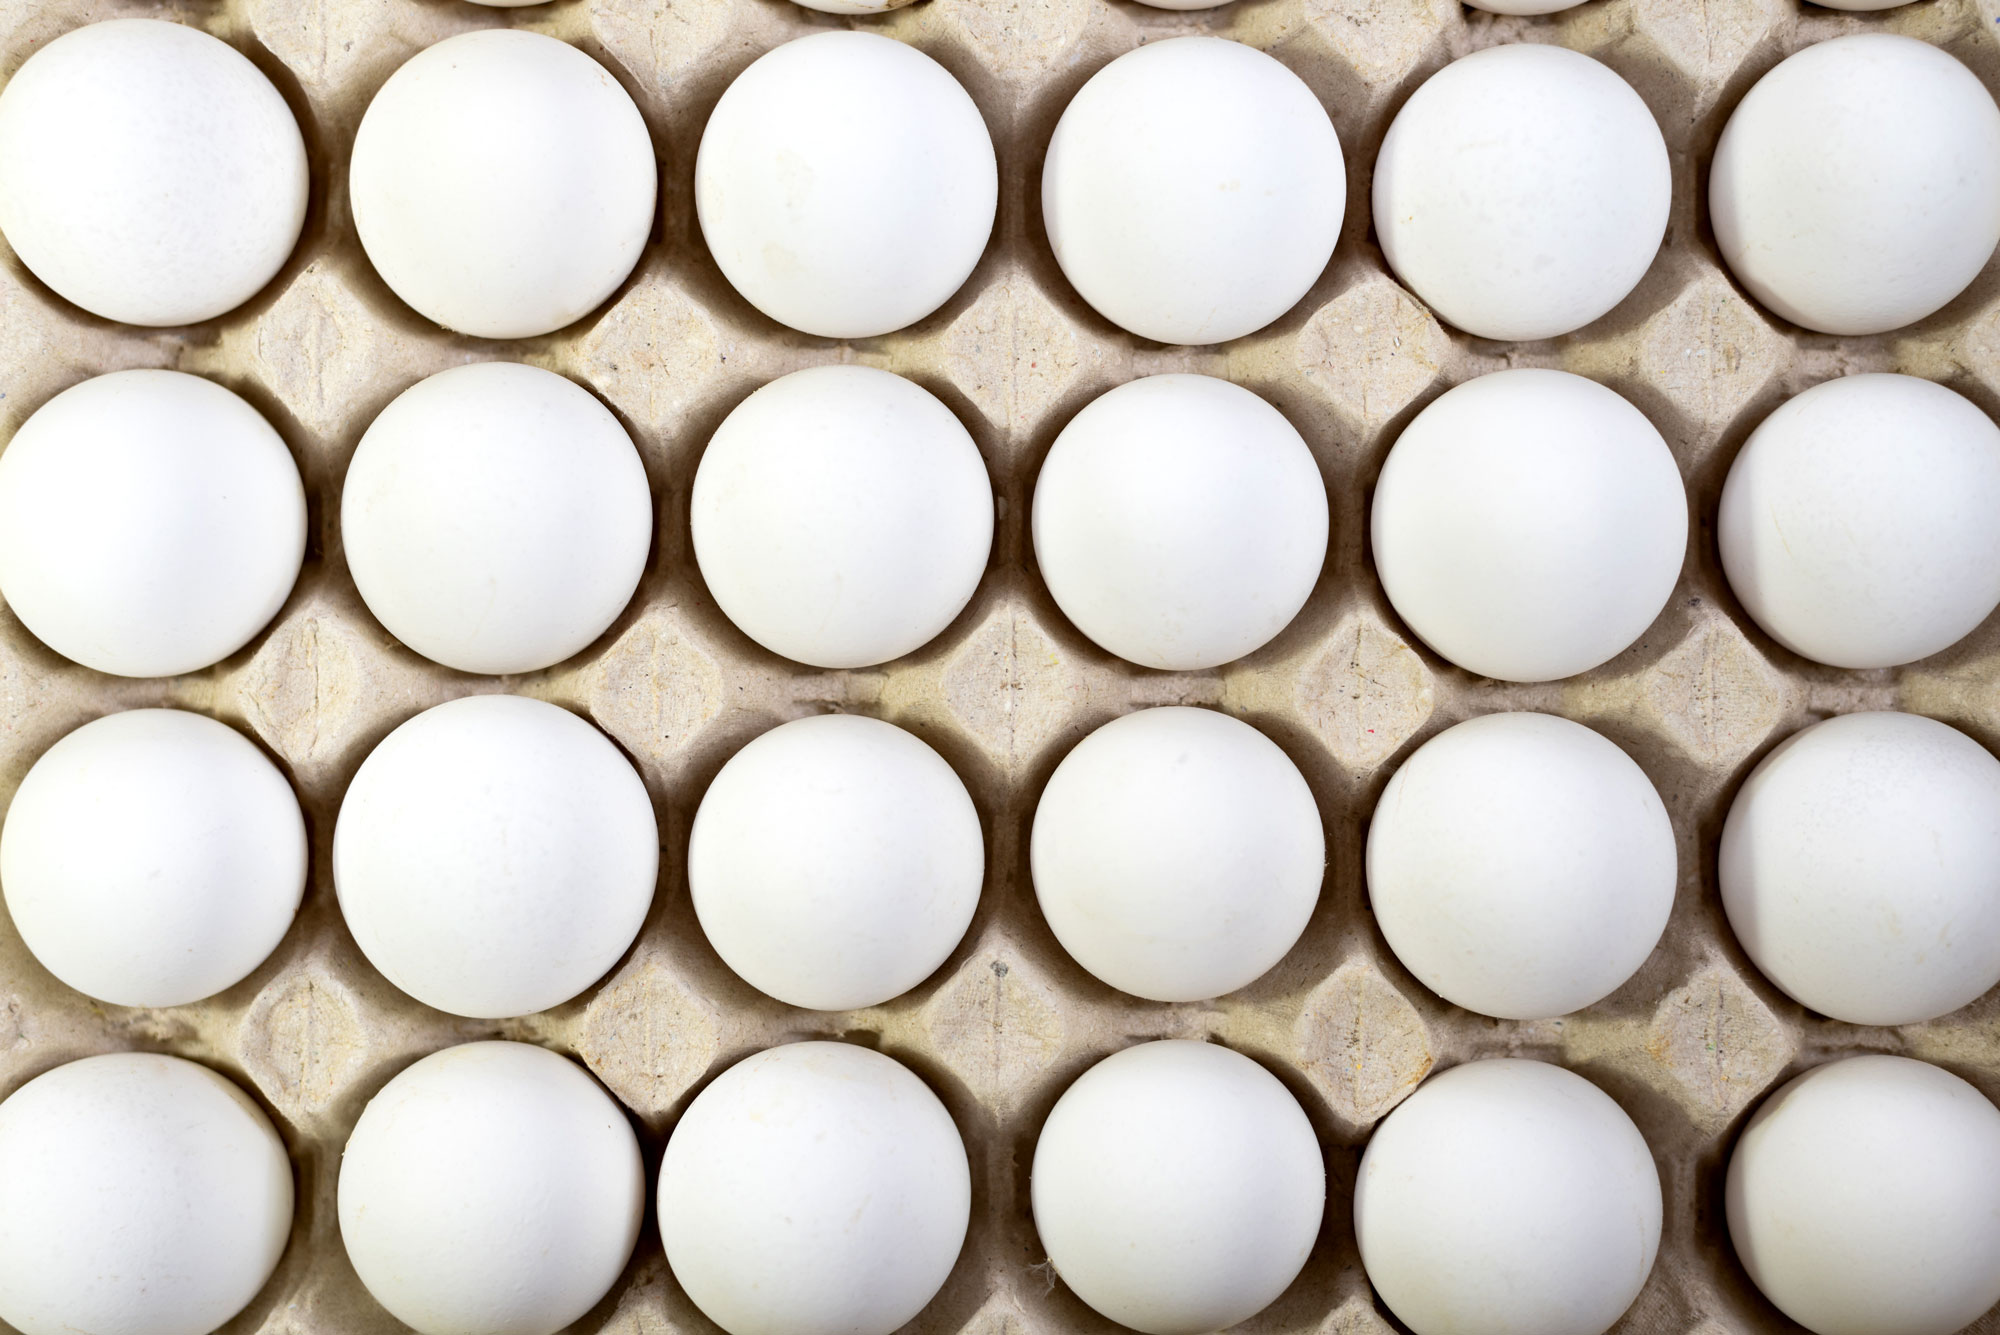 Featured image of a white egg with Eggs Unlimited's protective egg sleeve, demonstrating our commitment to delivering eggs safely and intact to our customers' locations